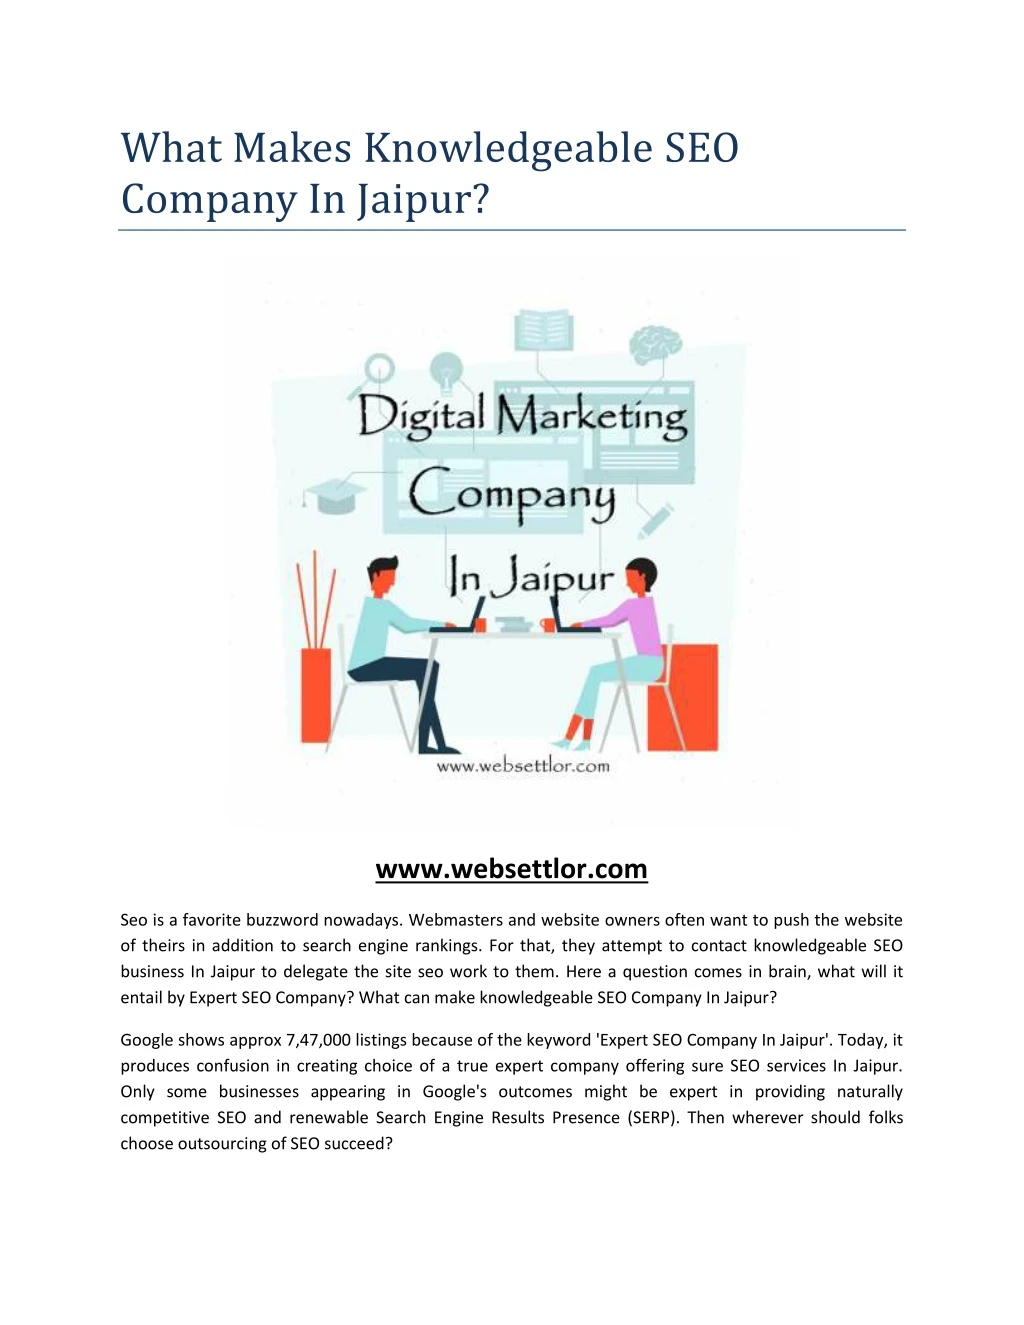 what makes knowledgeable seo company in jaipur